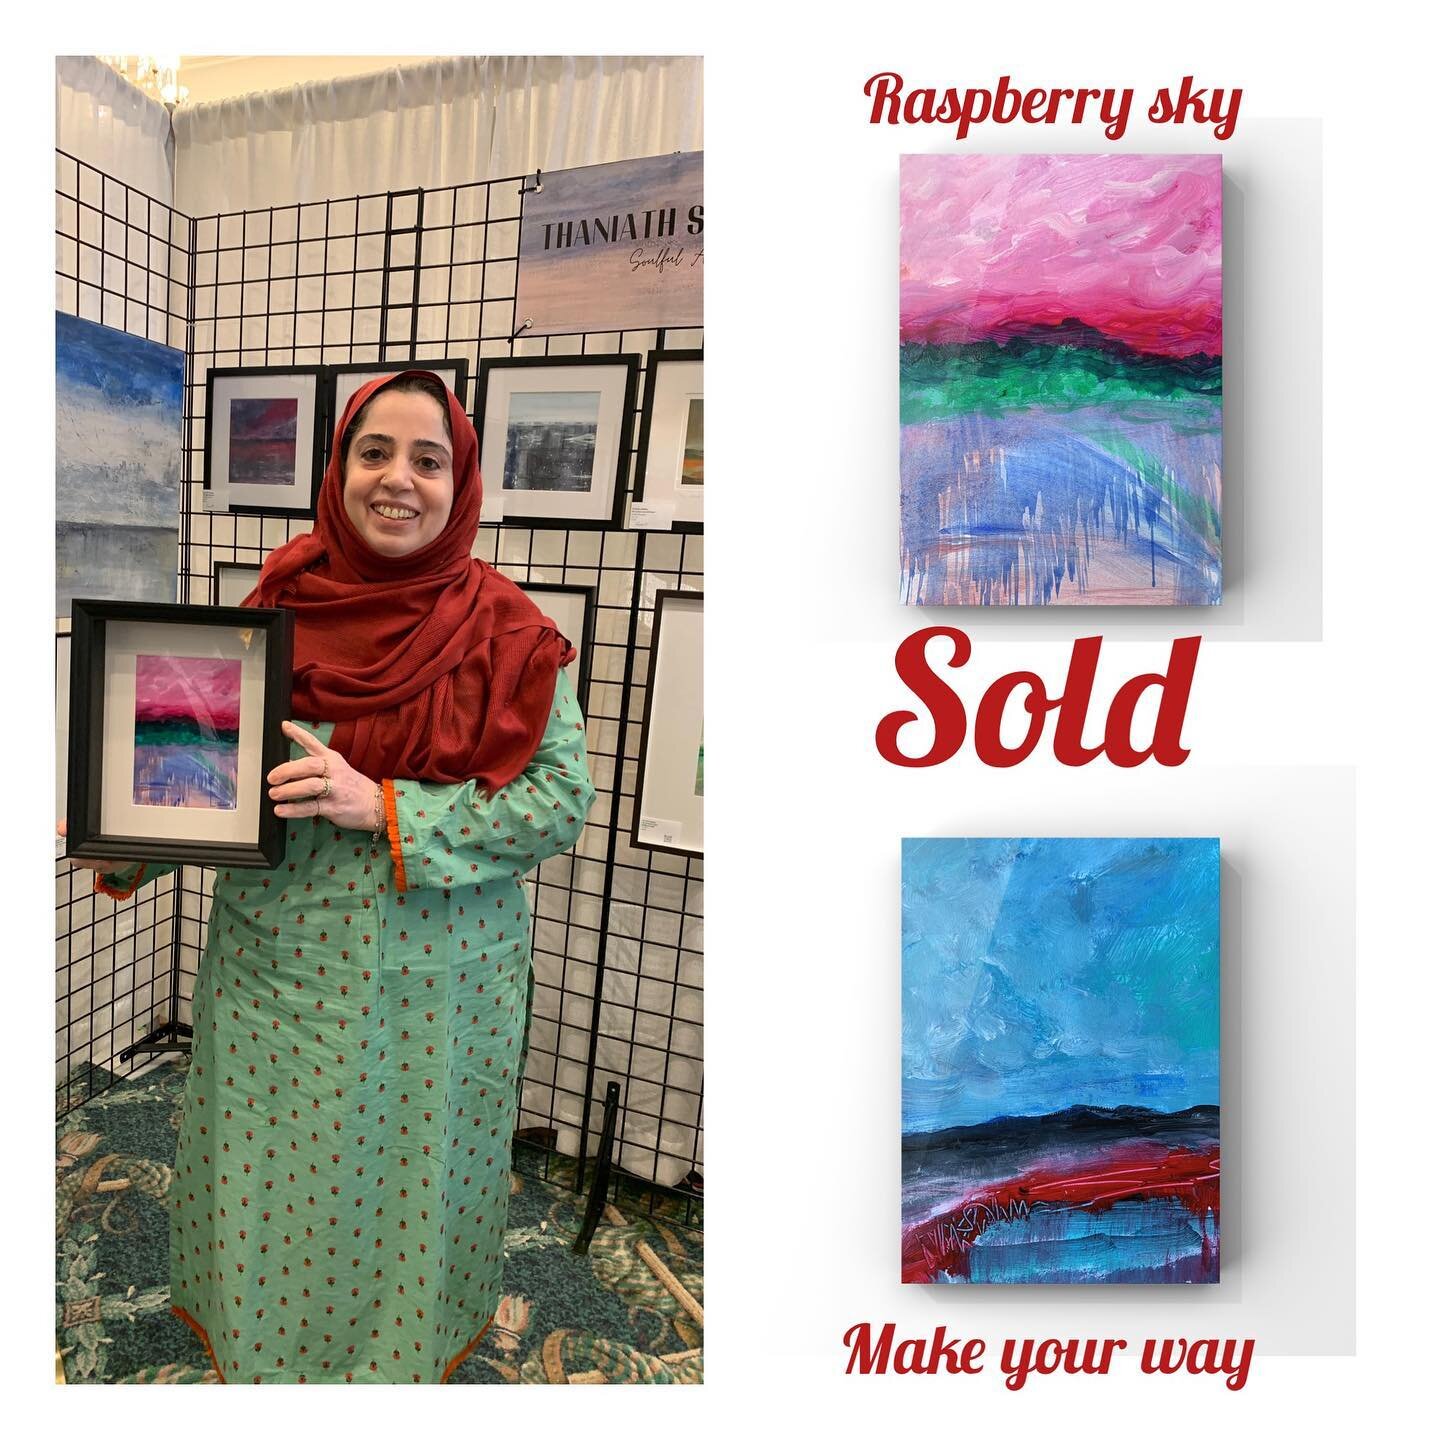 She picked up a set of two paintings. Framed in a neat box frame. She has been my biggest supporter over the years. So so happy they are with her now ❤️
Thank you @tasneemilyas 🙏

Make your Way and Raspberry sky sold at @artsonthecredit April Fine A